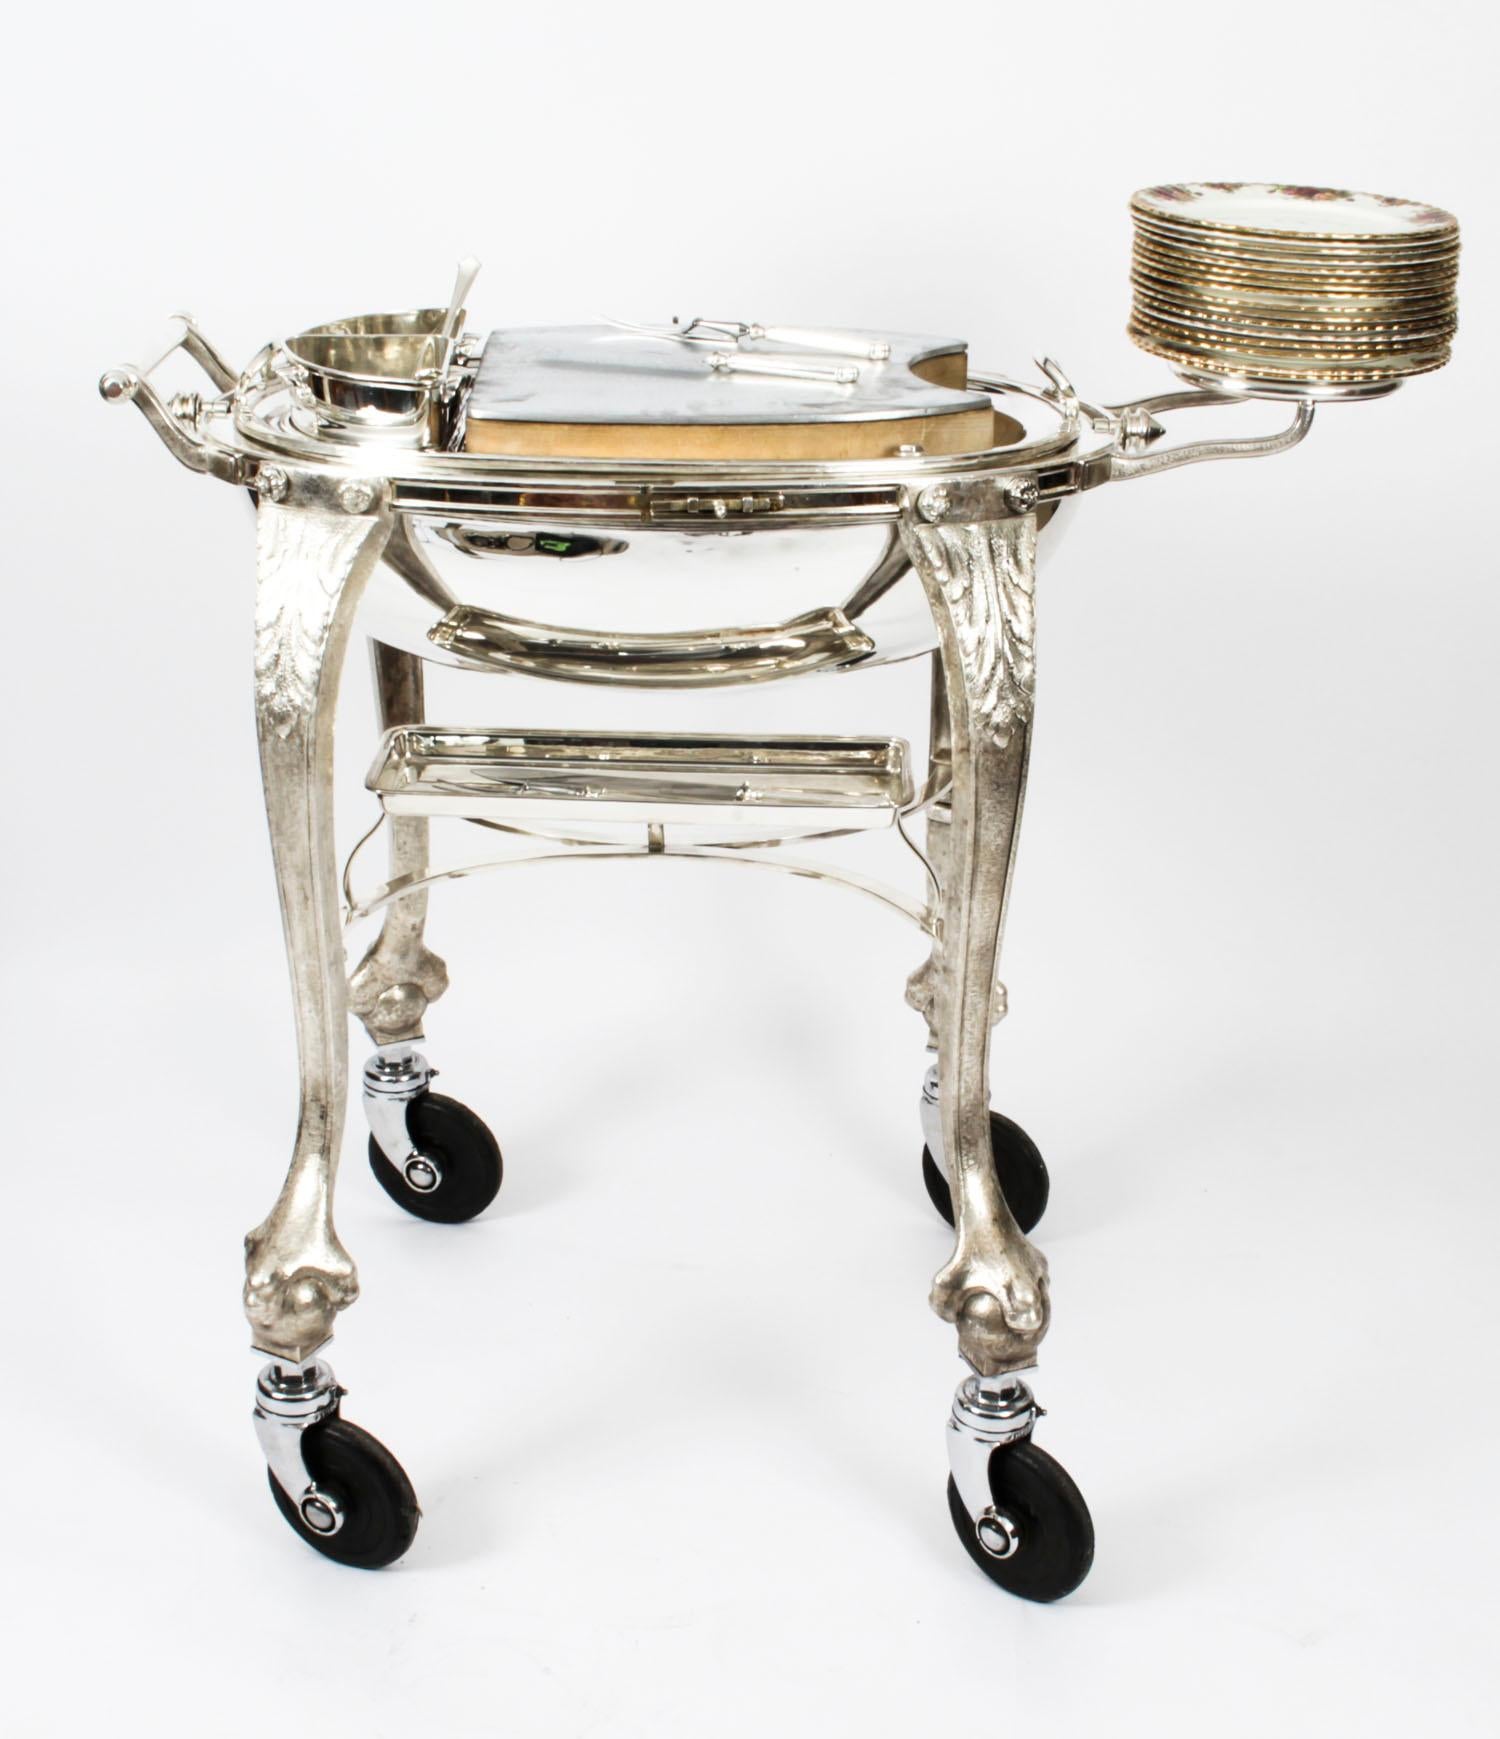 Mid-20th Century Antique Art Deco Silver Plated Beef Carving Trolley Cart, 1930s